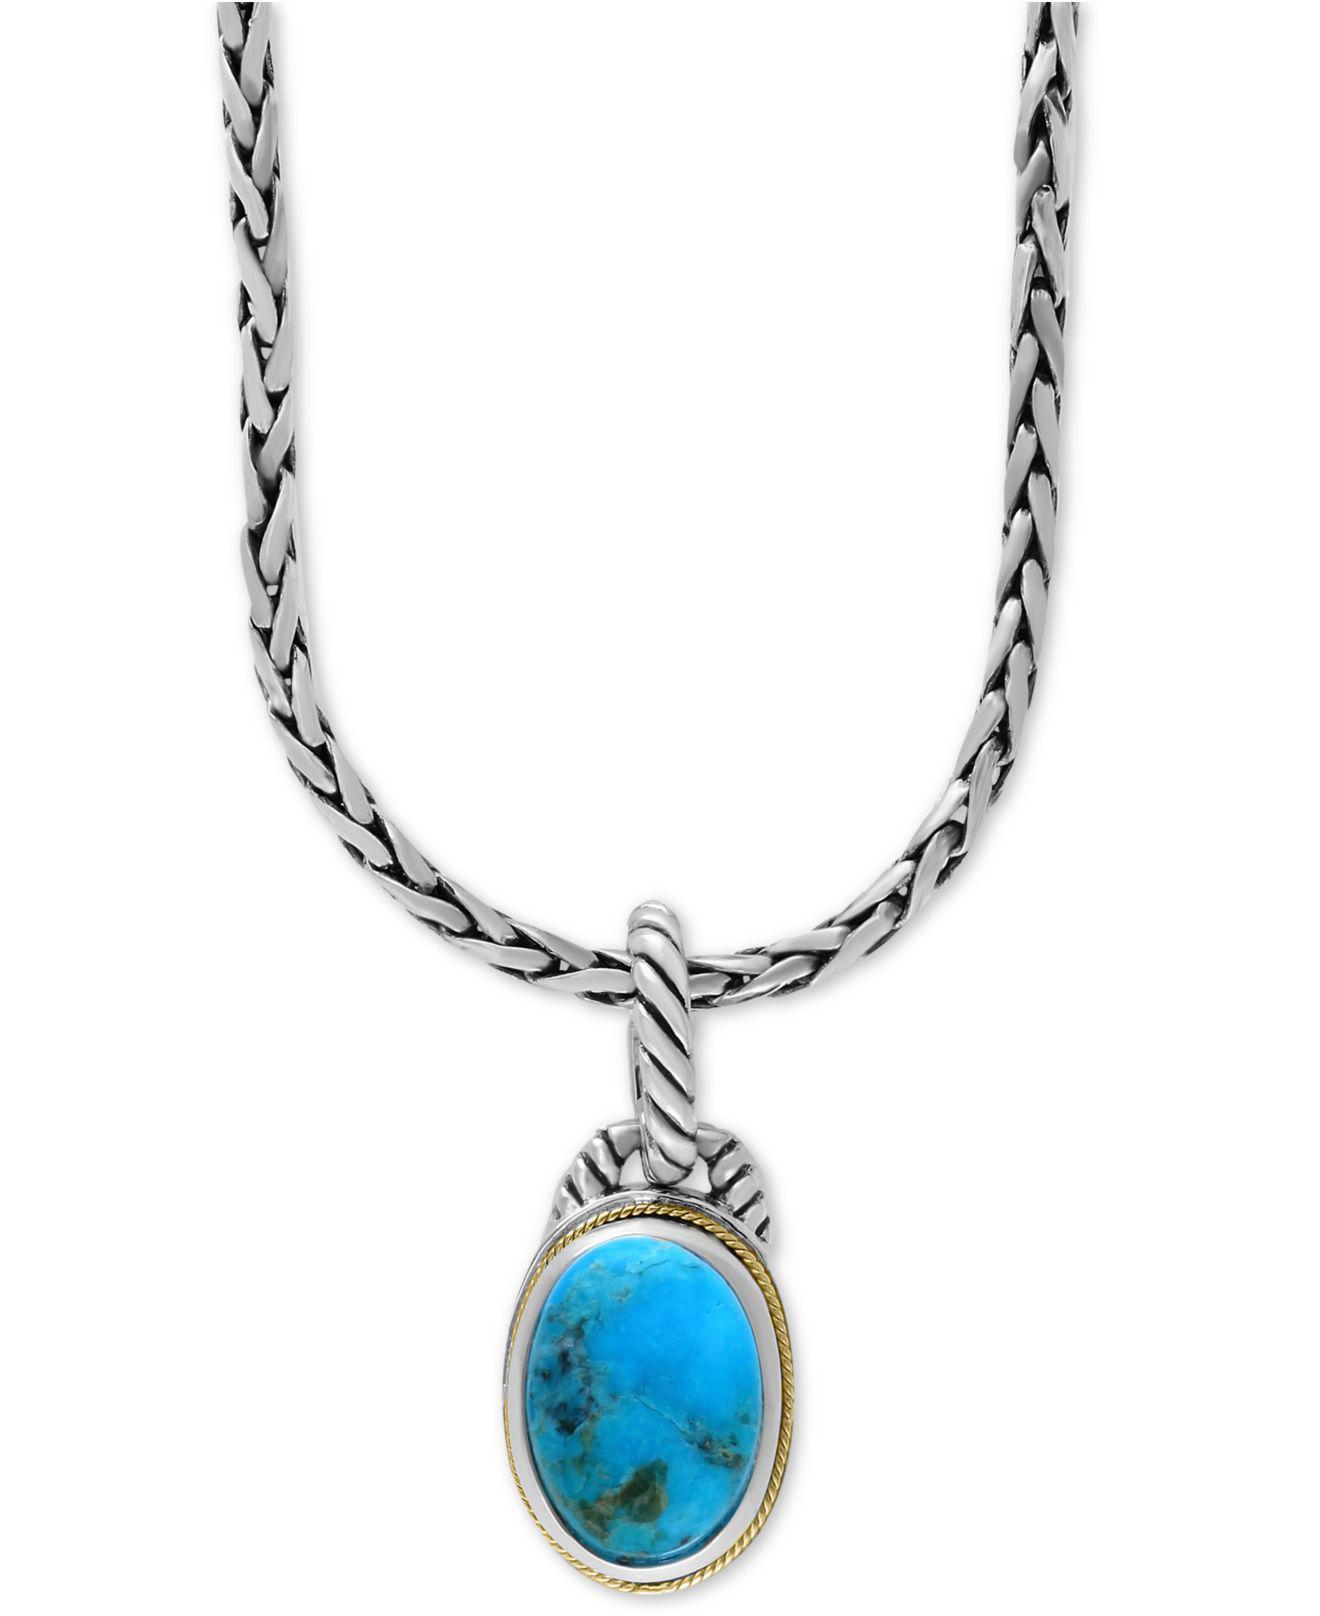 Lyst - Effy Collection Manufactured Turquoise Pendant Necklace (5-5/8 ...